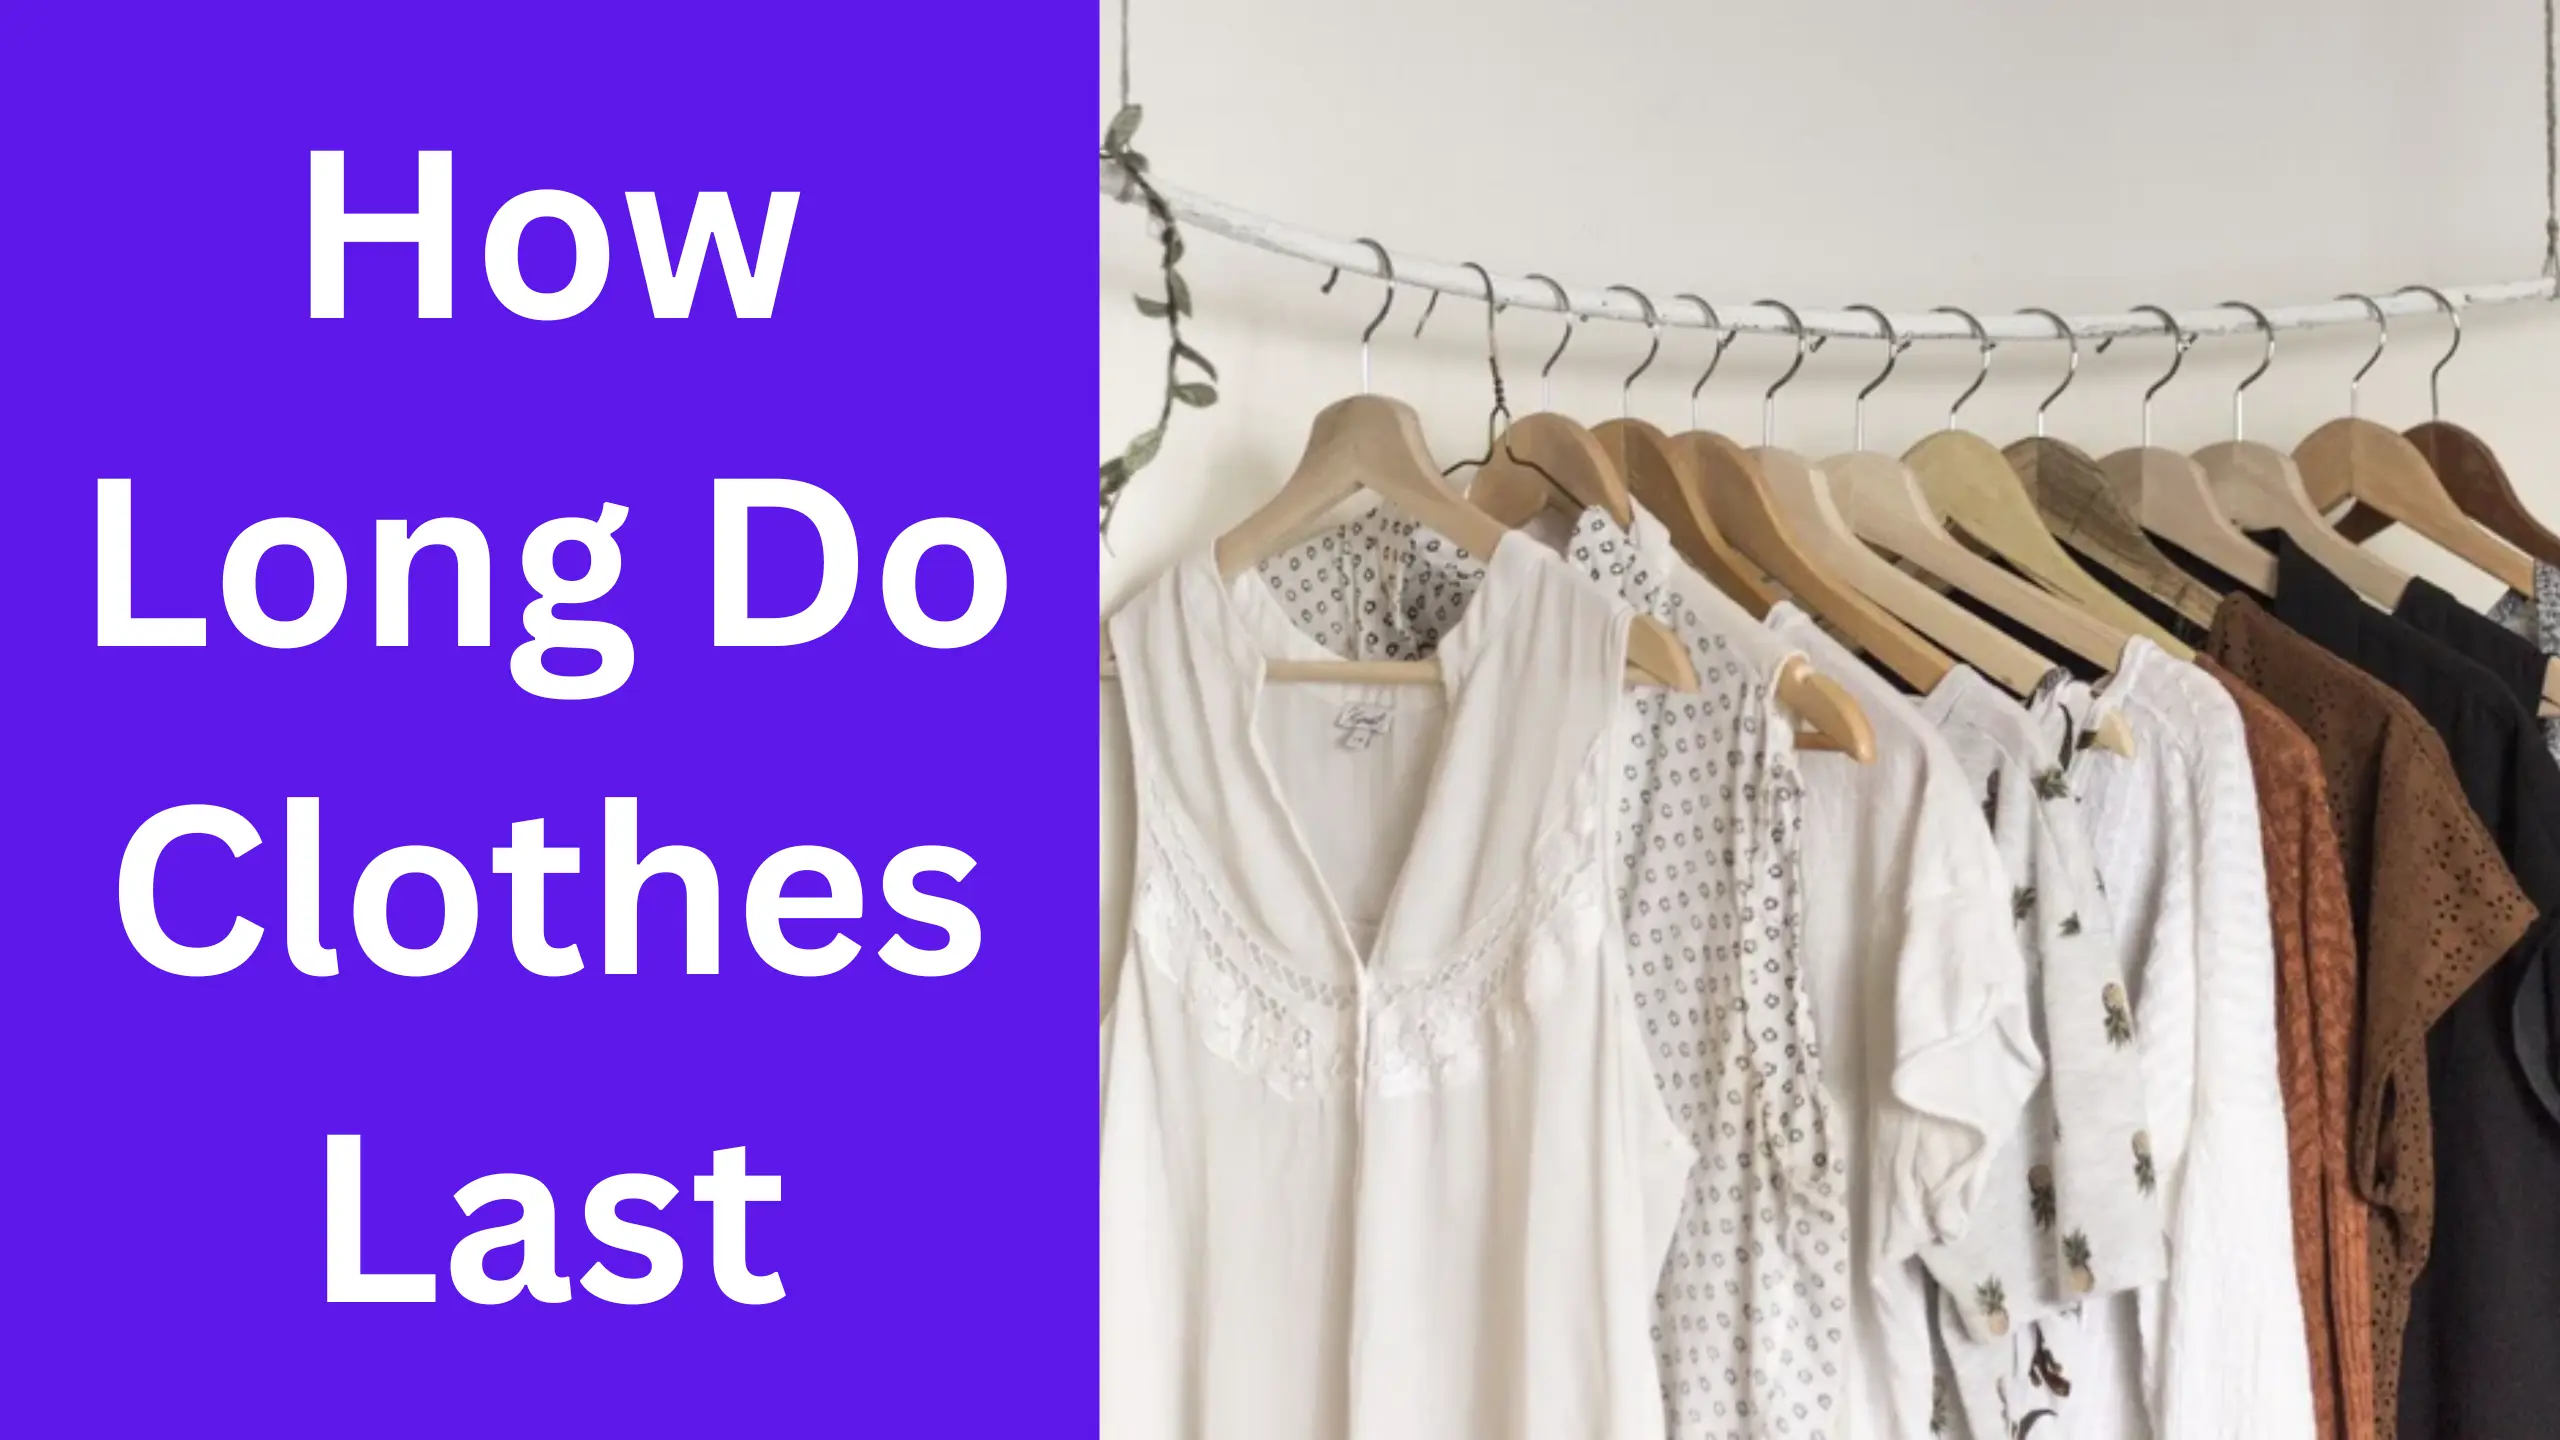 How Long Do Clothes Last A Comprehensive Guide to Extending the Lifespan of Your Wardrobe